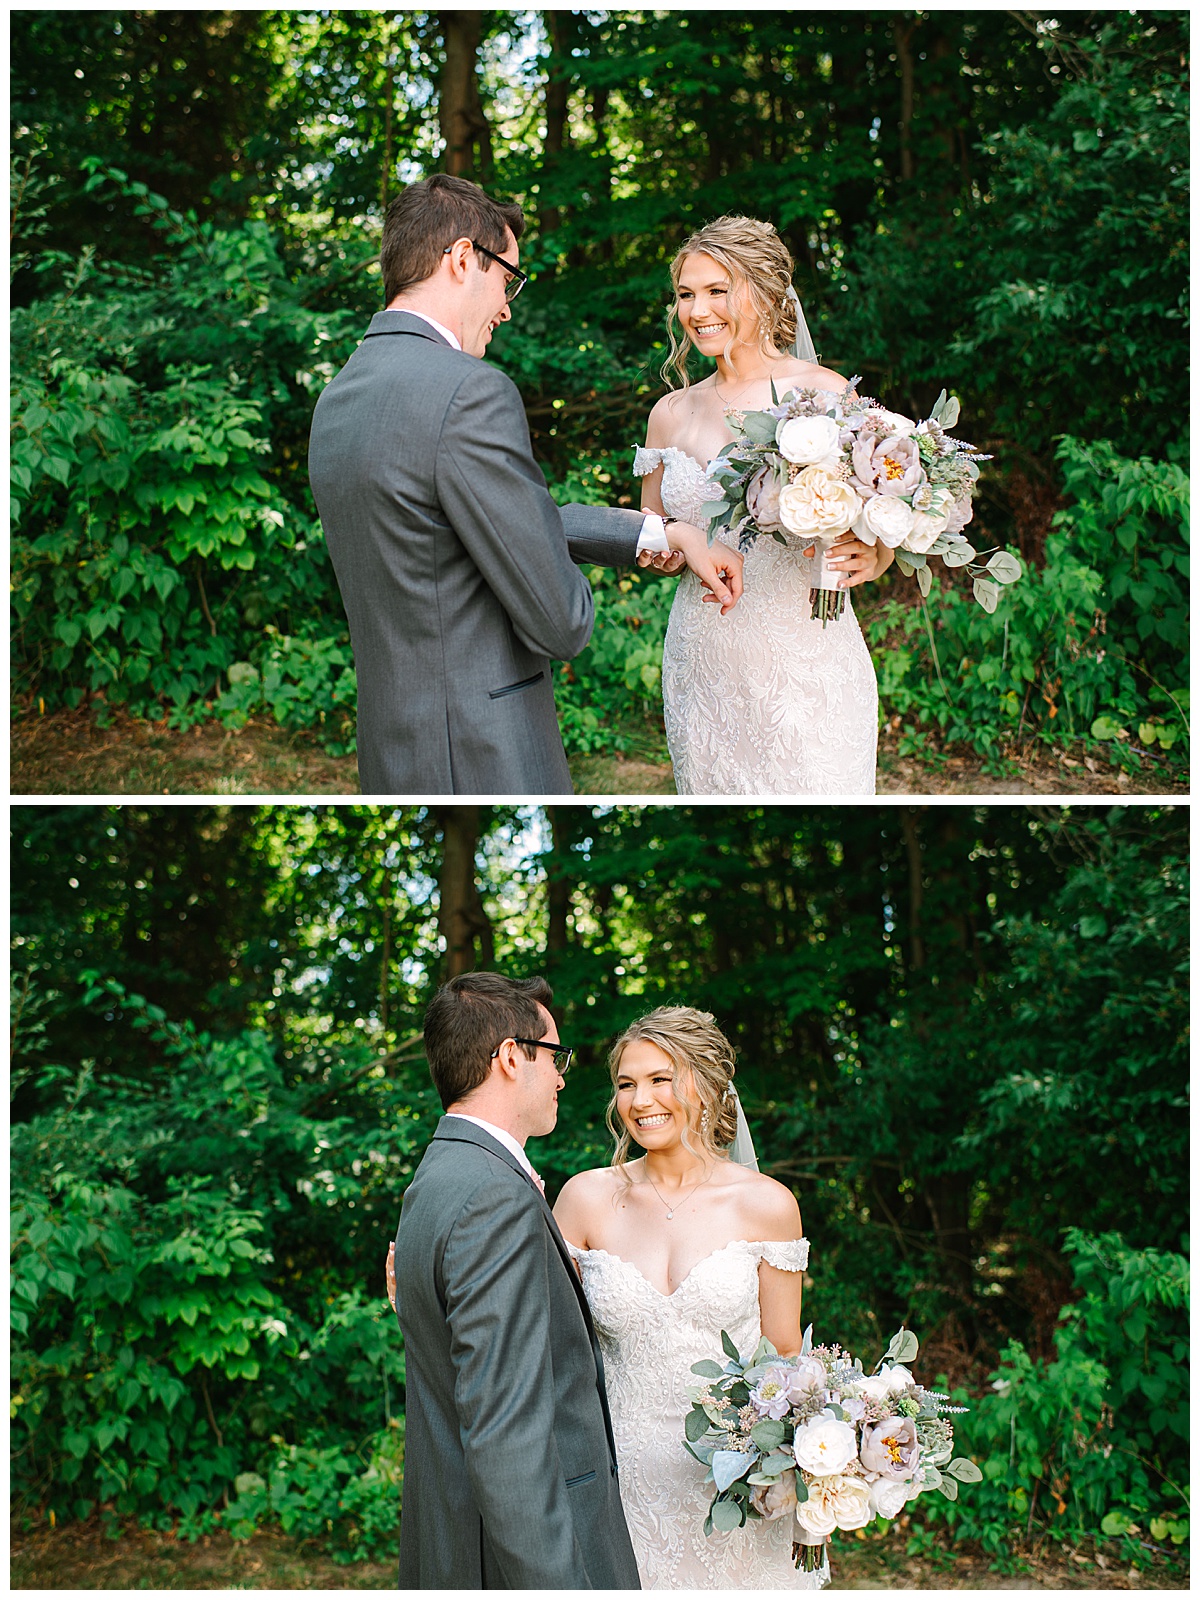 Couple share smiles by Brittany Emerson Photography